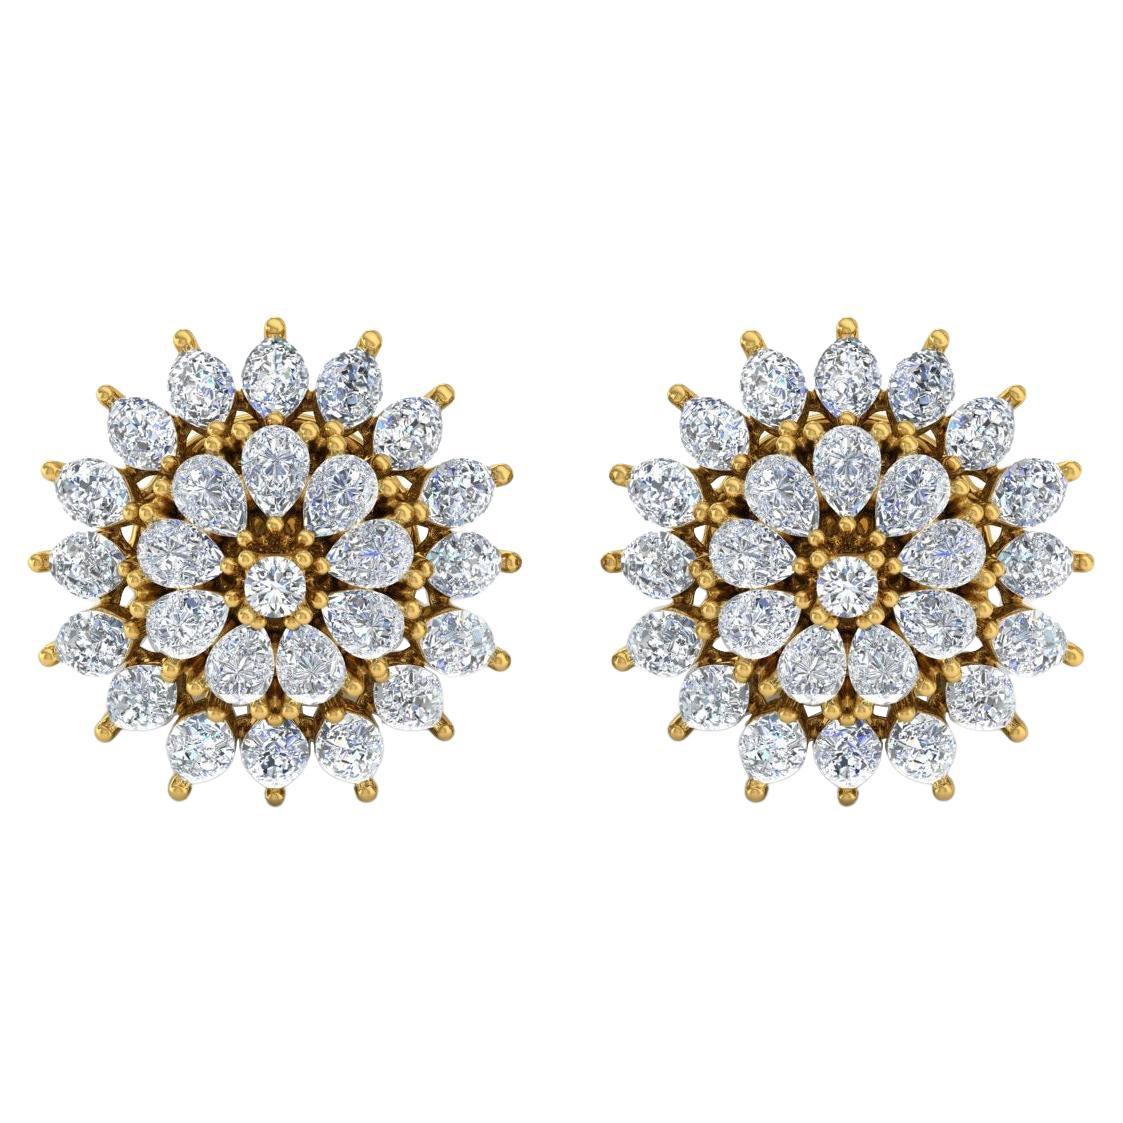 3 Carat SI Clarity HI Color Pear Diamond Starburst Stud Earrings 18k Yellow Gold For Sale